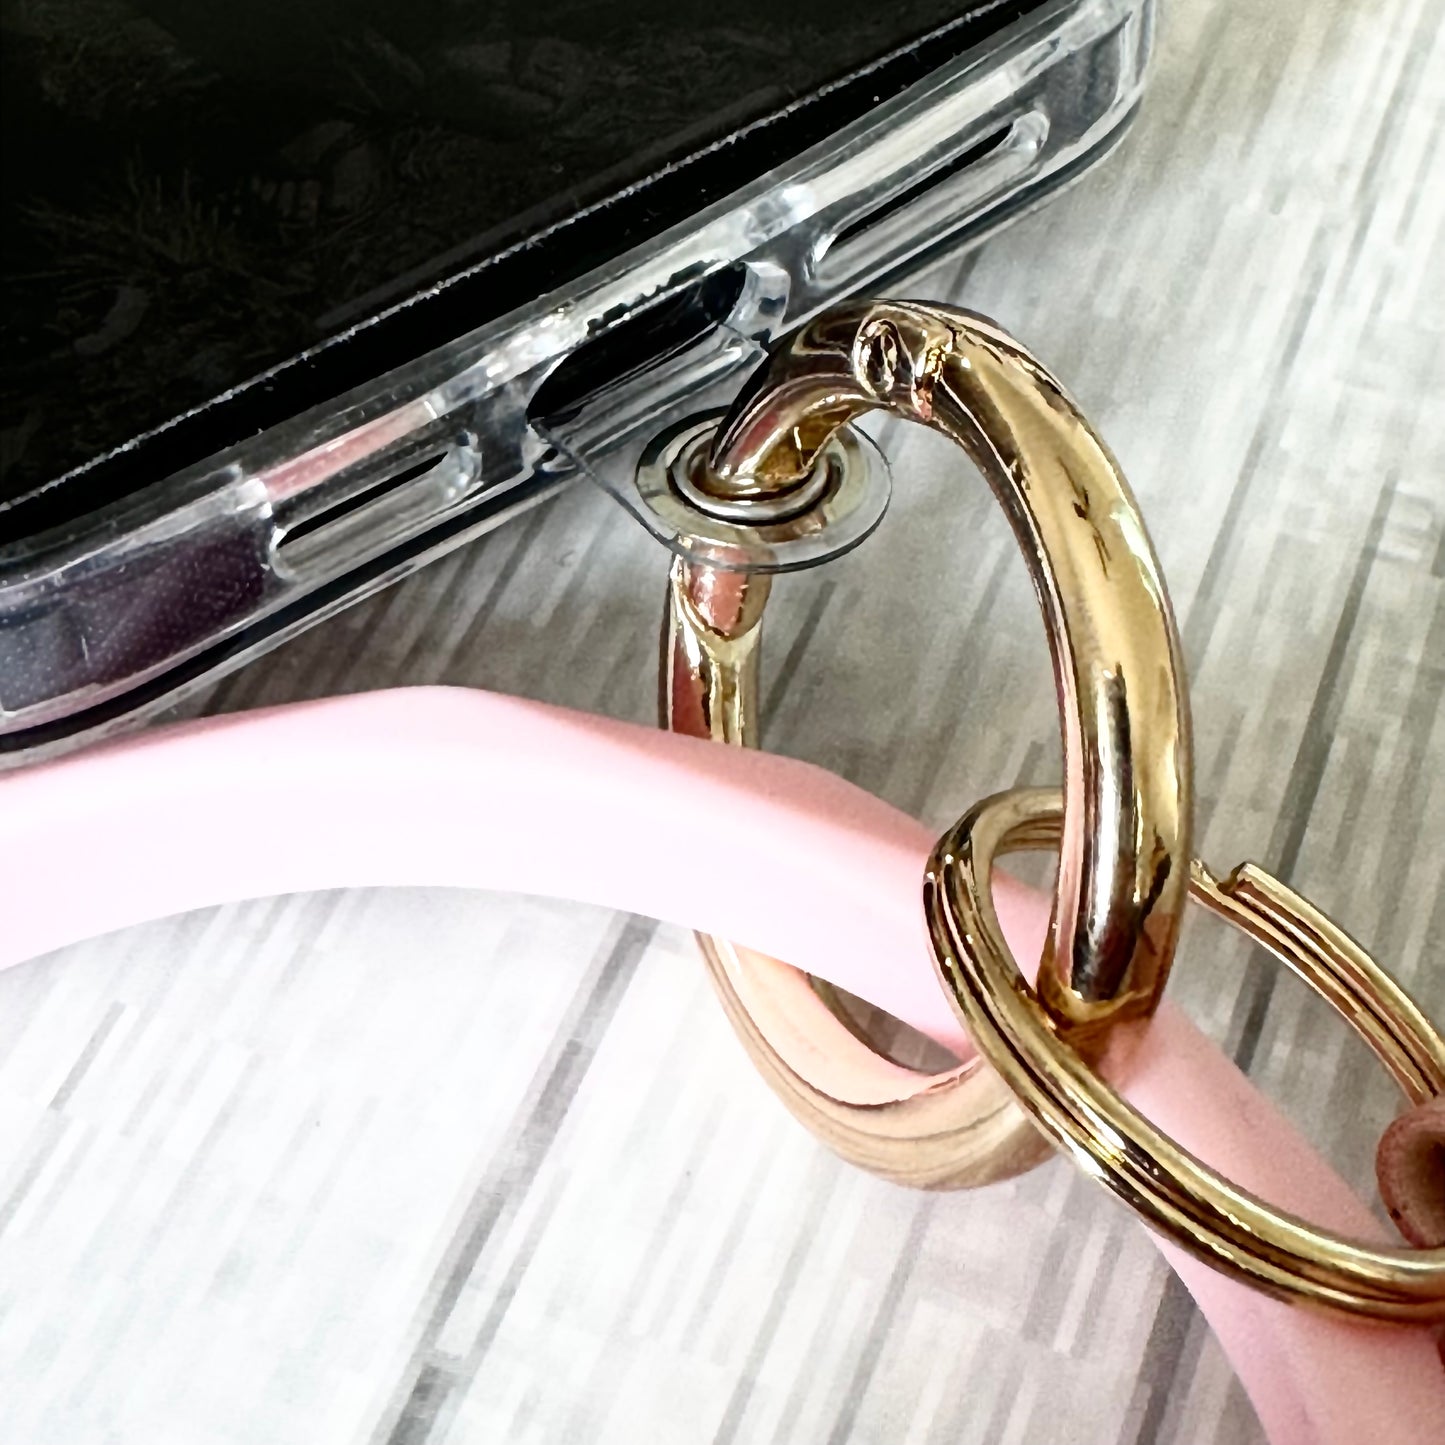 Phone Bracelet Keychain with Tether Tab - NEON PINK